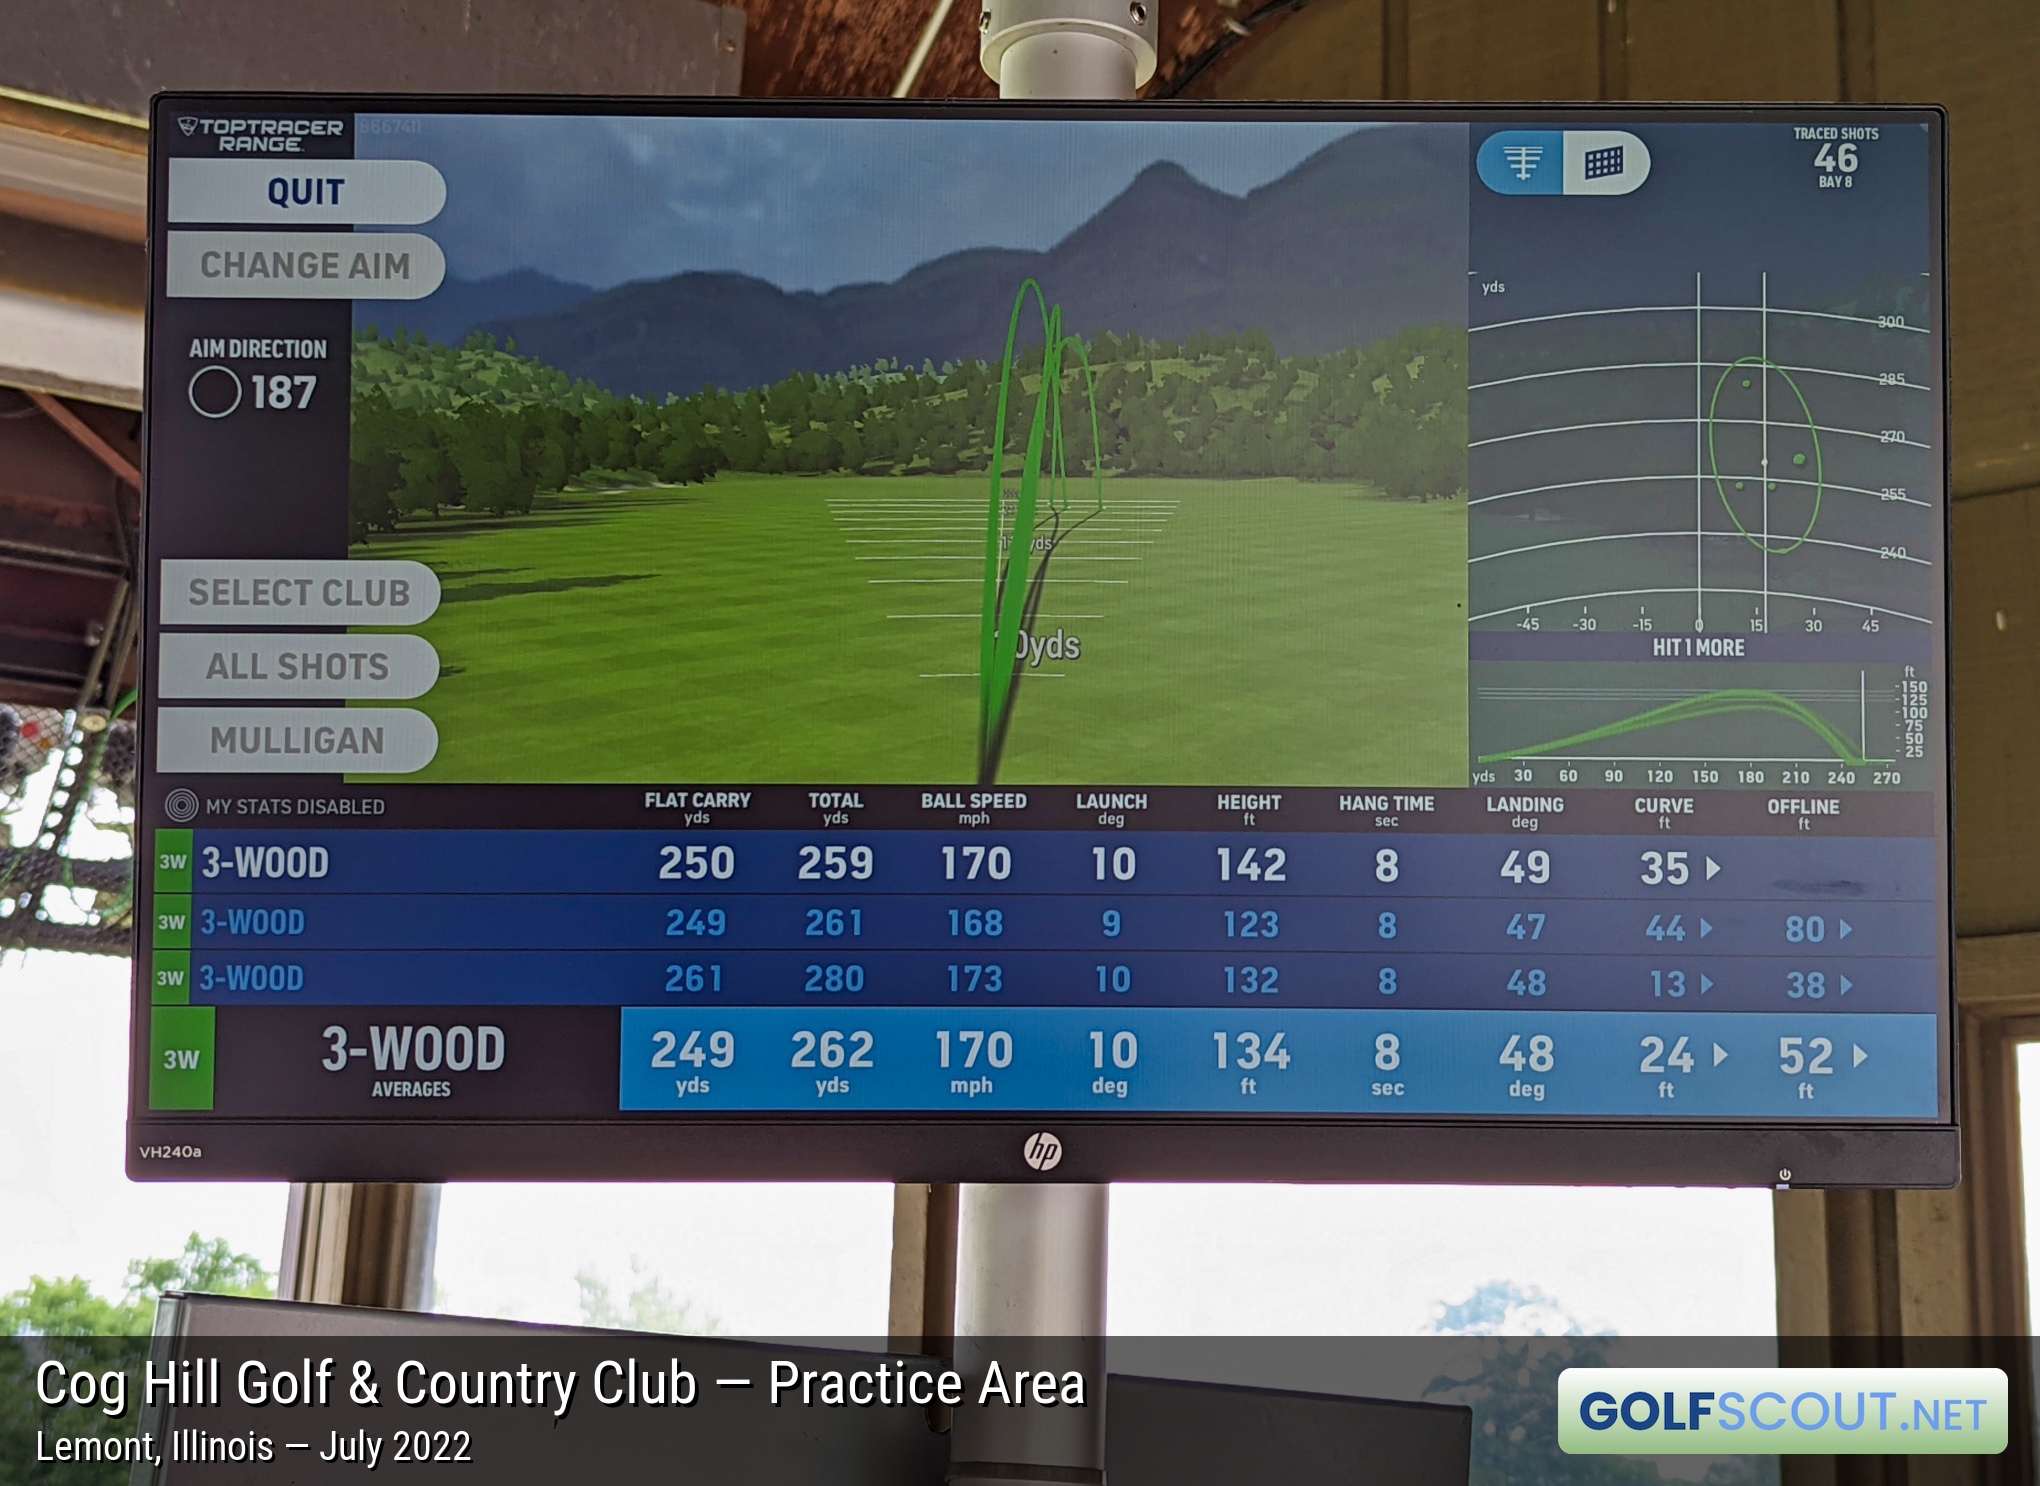 Photo of the practice area at Cog Hill Course #4 - Dubsdread in Lemont, Illinois. TopTracer keeps track of all your shots. You get the carry distance, total distance, ball speed, launch angle, height, hang time, etc. Really cool to see your cumulative shot stats and trajectories.